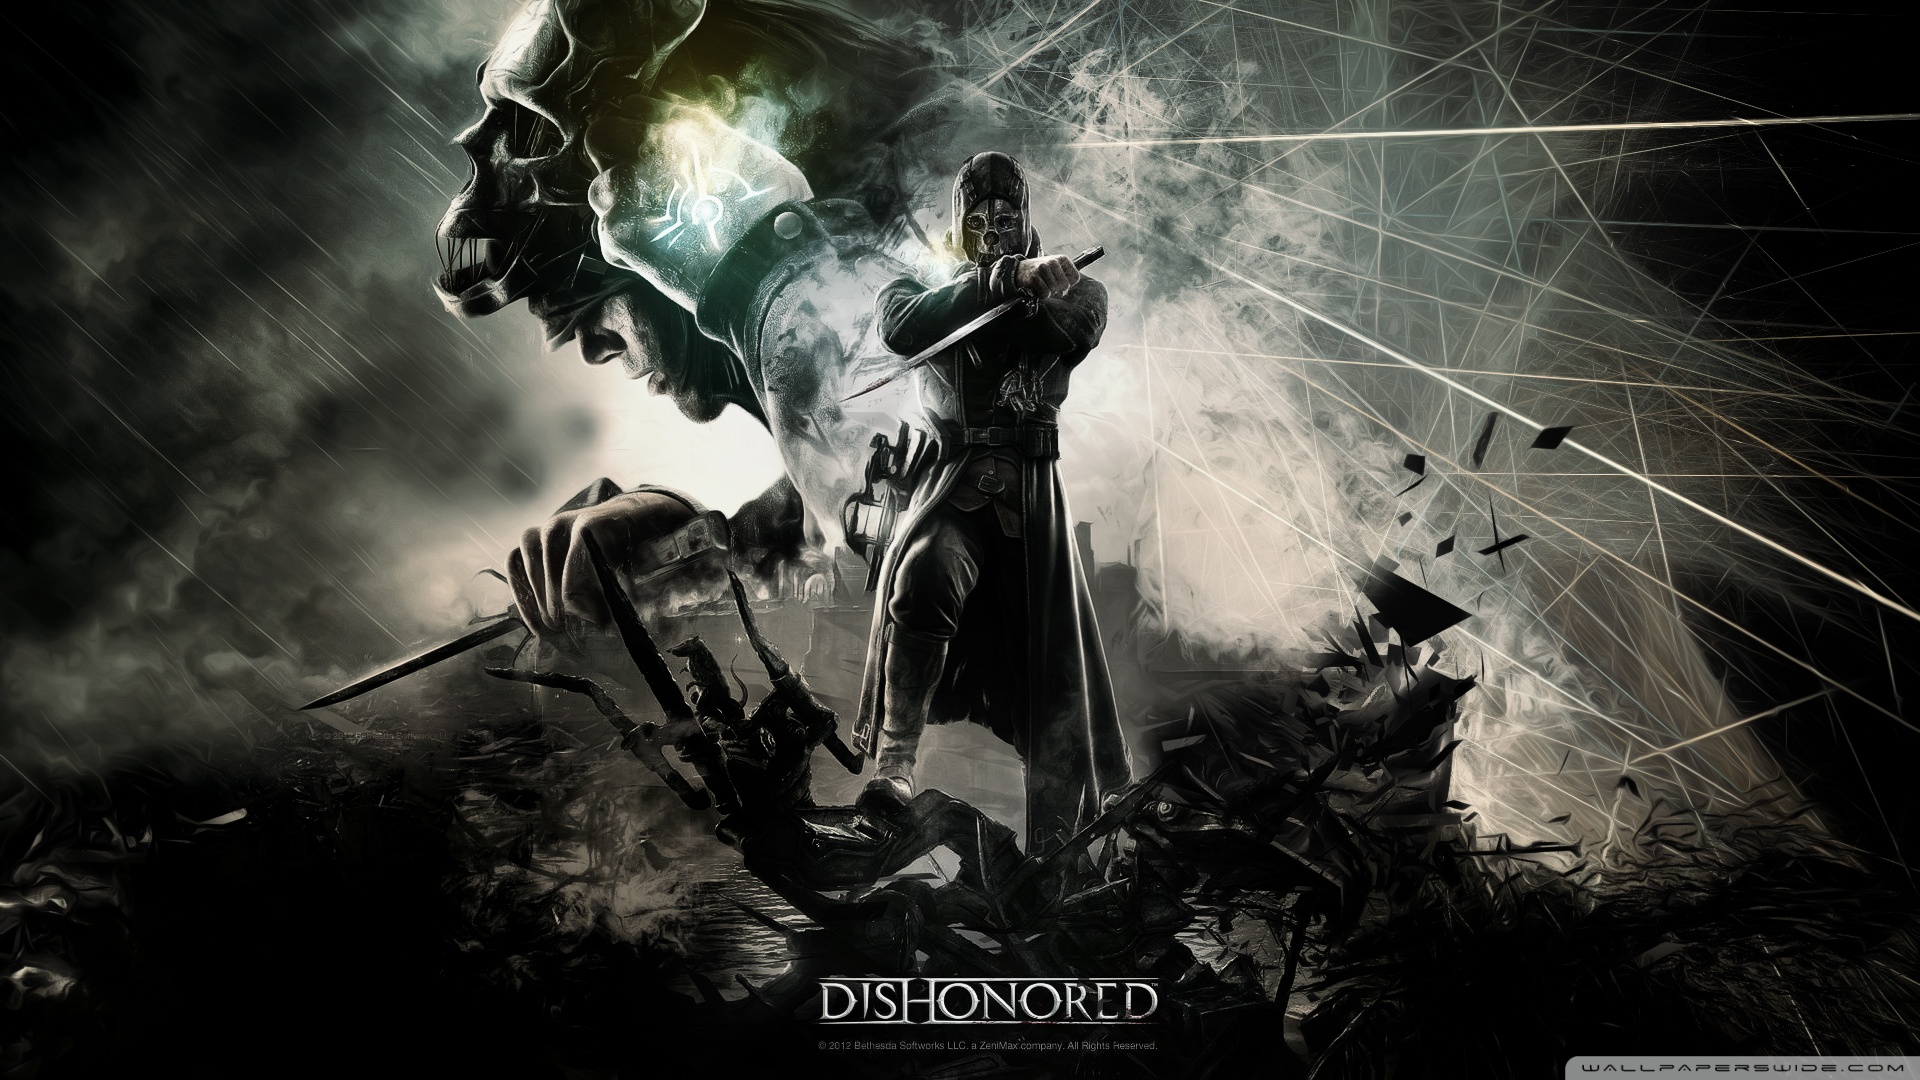 Dishonored Video Game Wallpaper 1920x1080 Dishonored Video Game